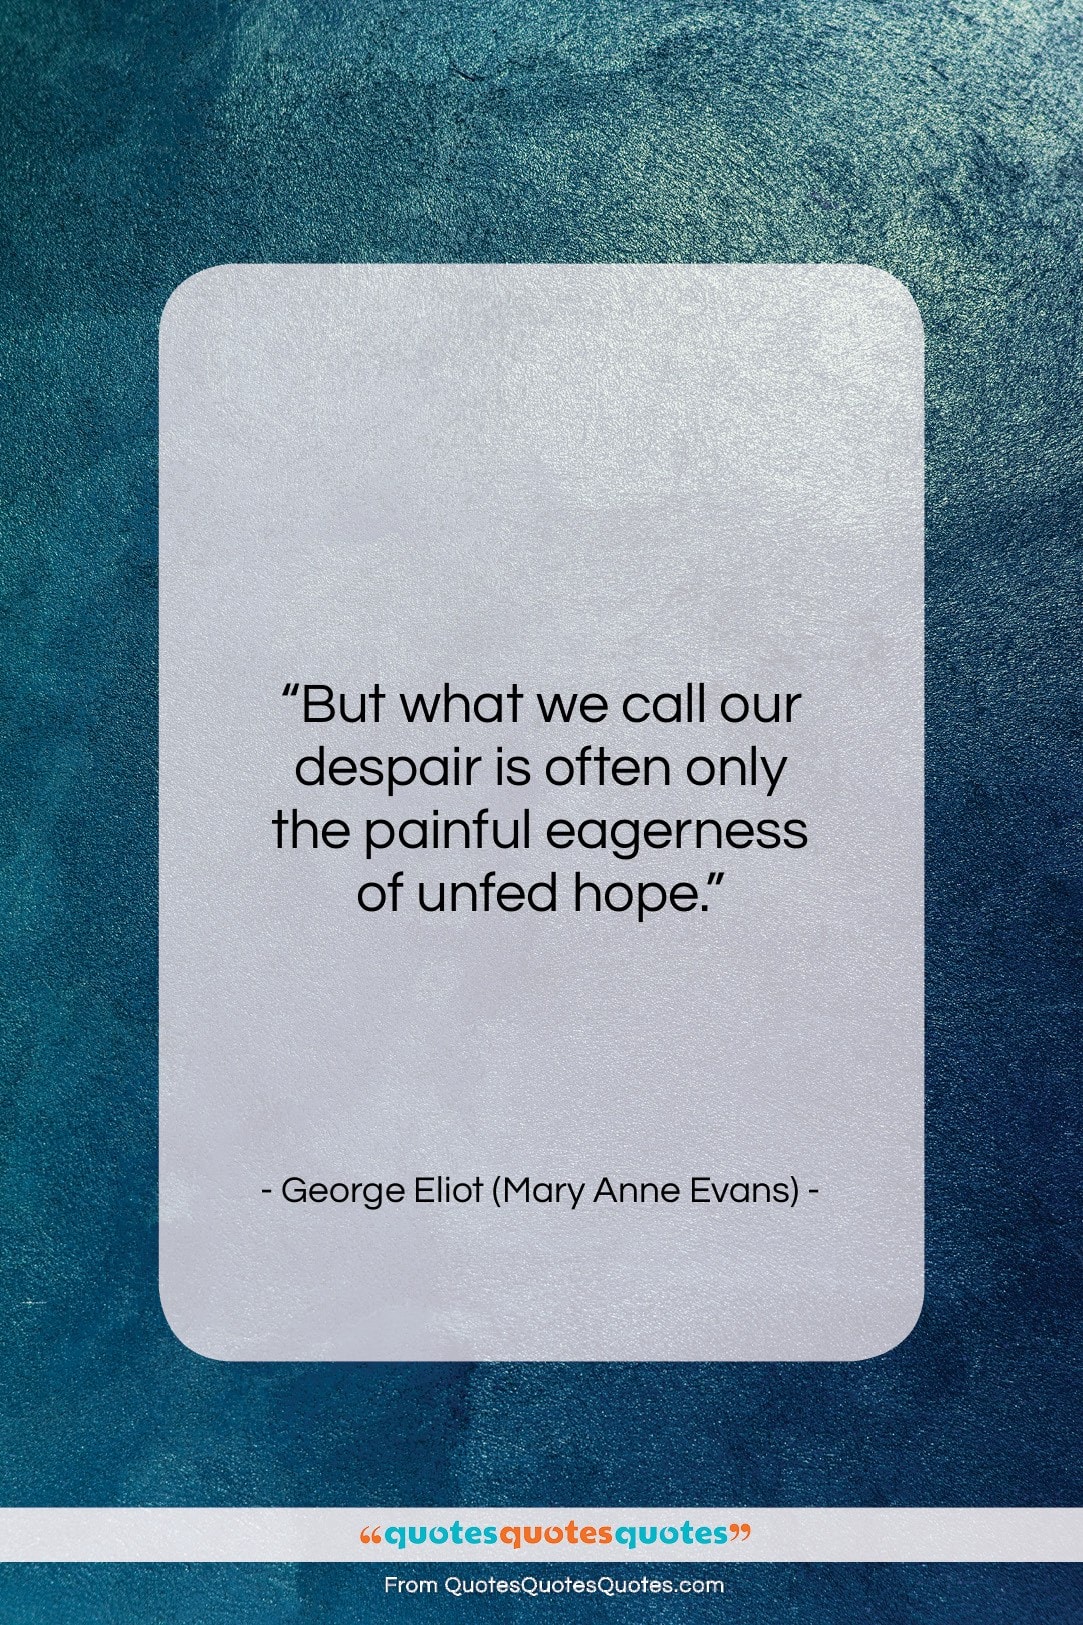 George Eliot (Mary Anne Evans) quote: “But what we call our despair is…”- at QuotesQuotesQuotes.com